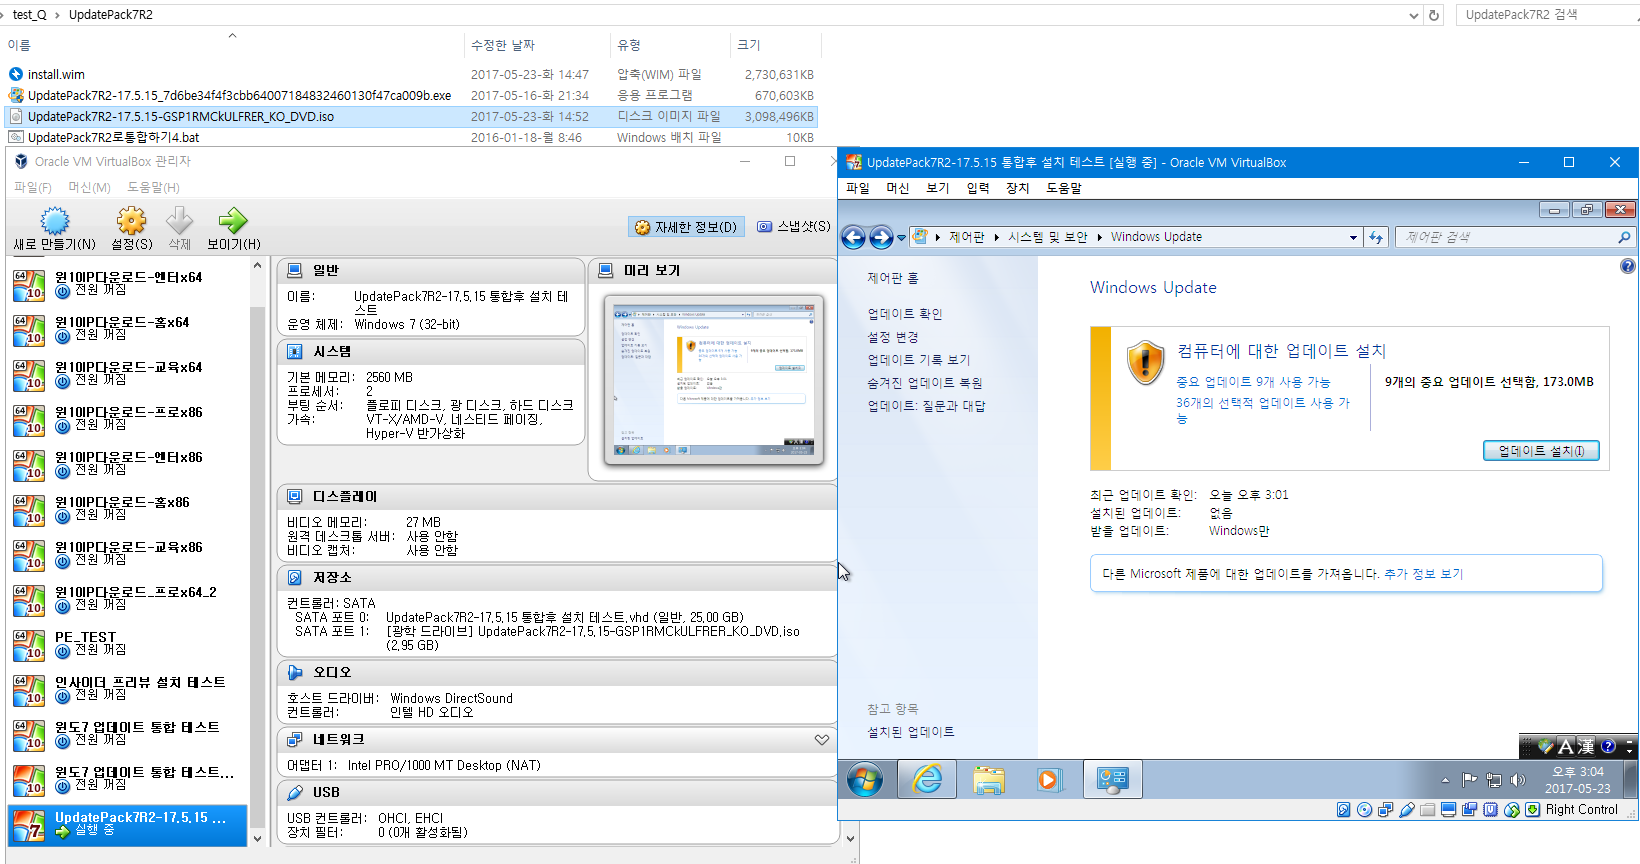 UpdatePack7R2 23.7.12 instal the new for windows